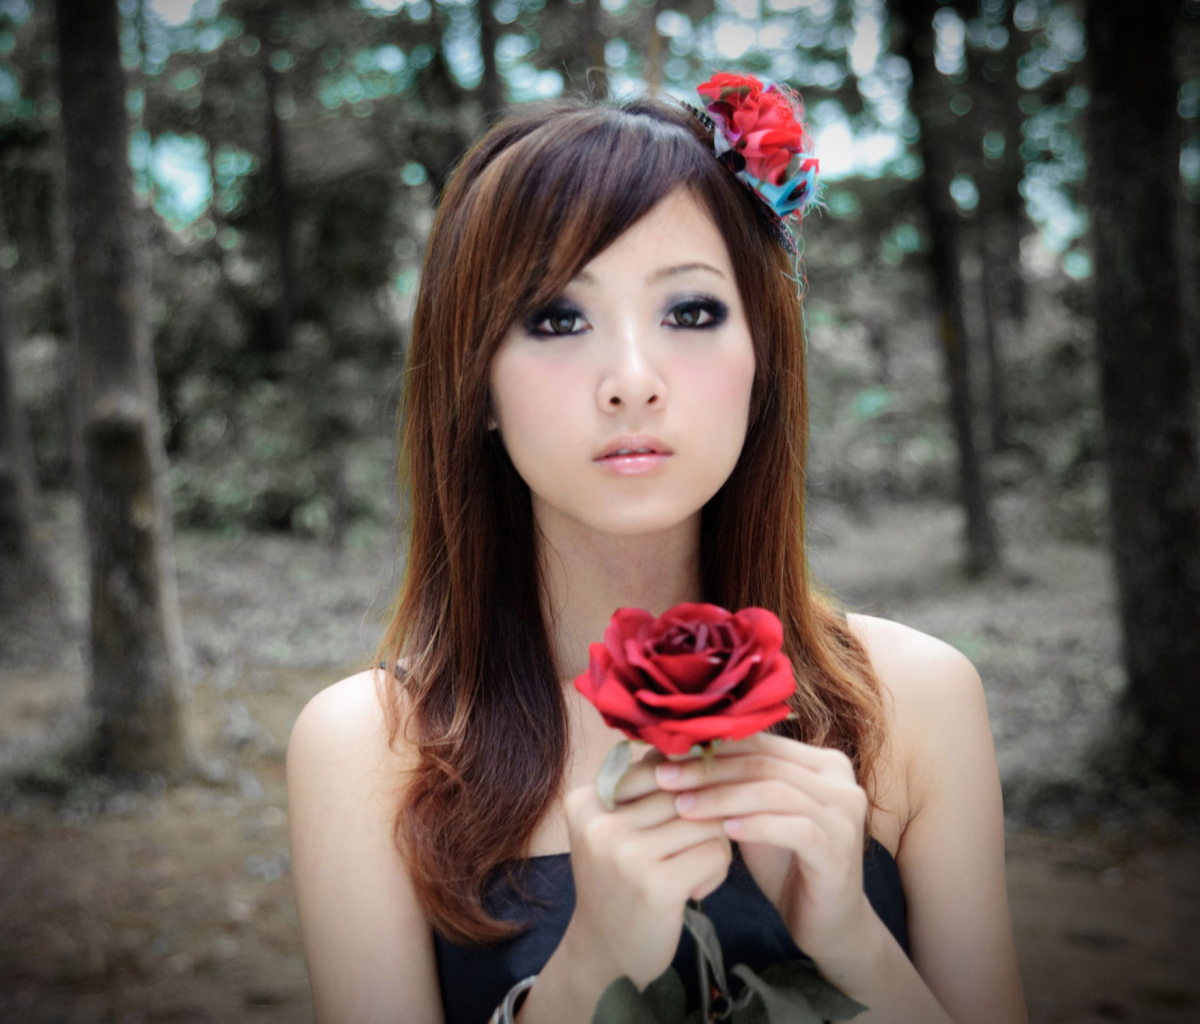 Das Asian Girl With Red Rose Wallpaper 1200x1024